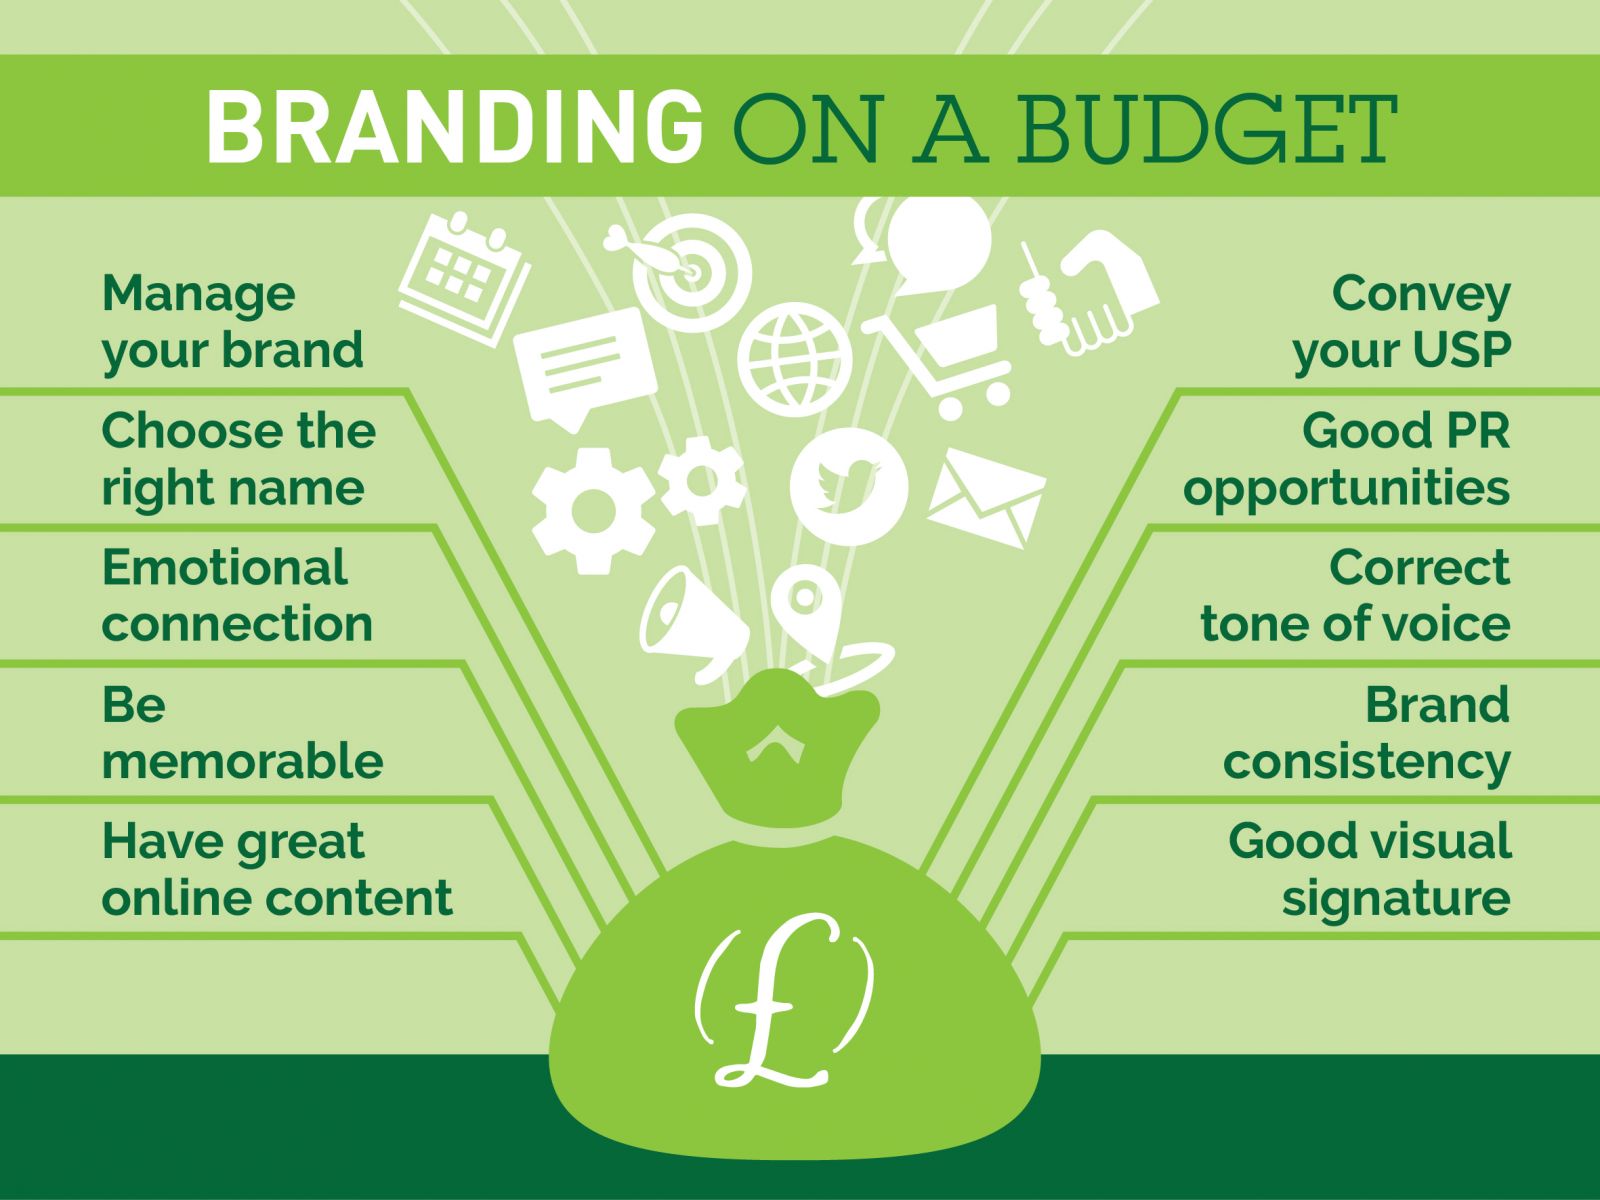 Branding on a budget tips